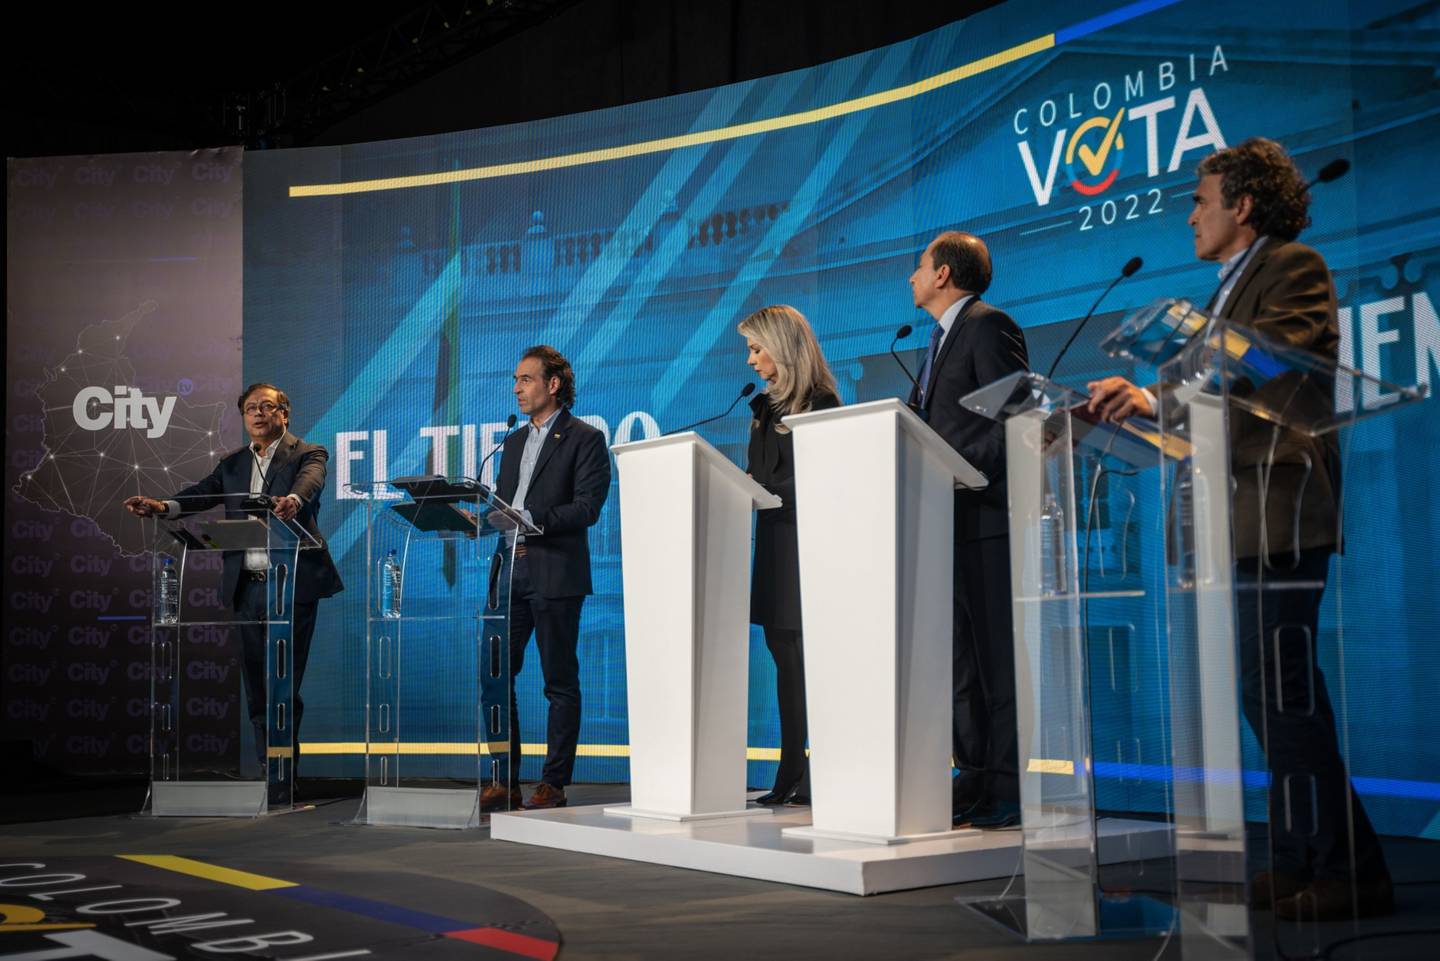 Gustavo Petro, the left-wing presidential candidate leading the polls for the Colombia Humana party (left), with Federico Gutiérrez, candidate for the Creemos (second from left), and Sergio Fajardo, the Coalición Centro Esperanza canidate (far right), during a debate in Bogotá on May 23, 2022.